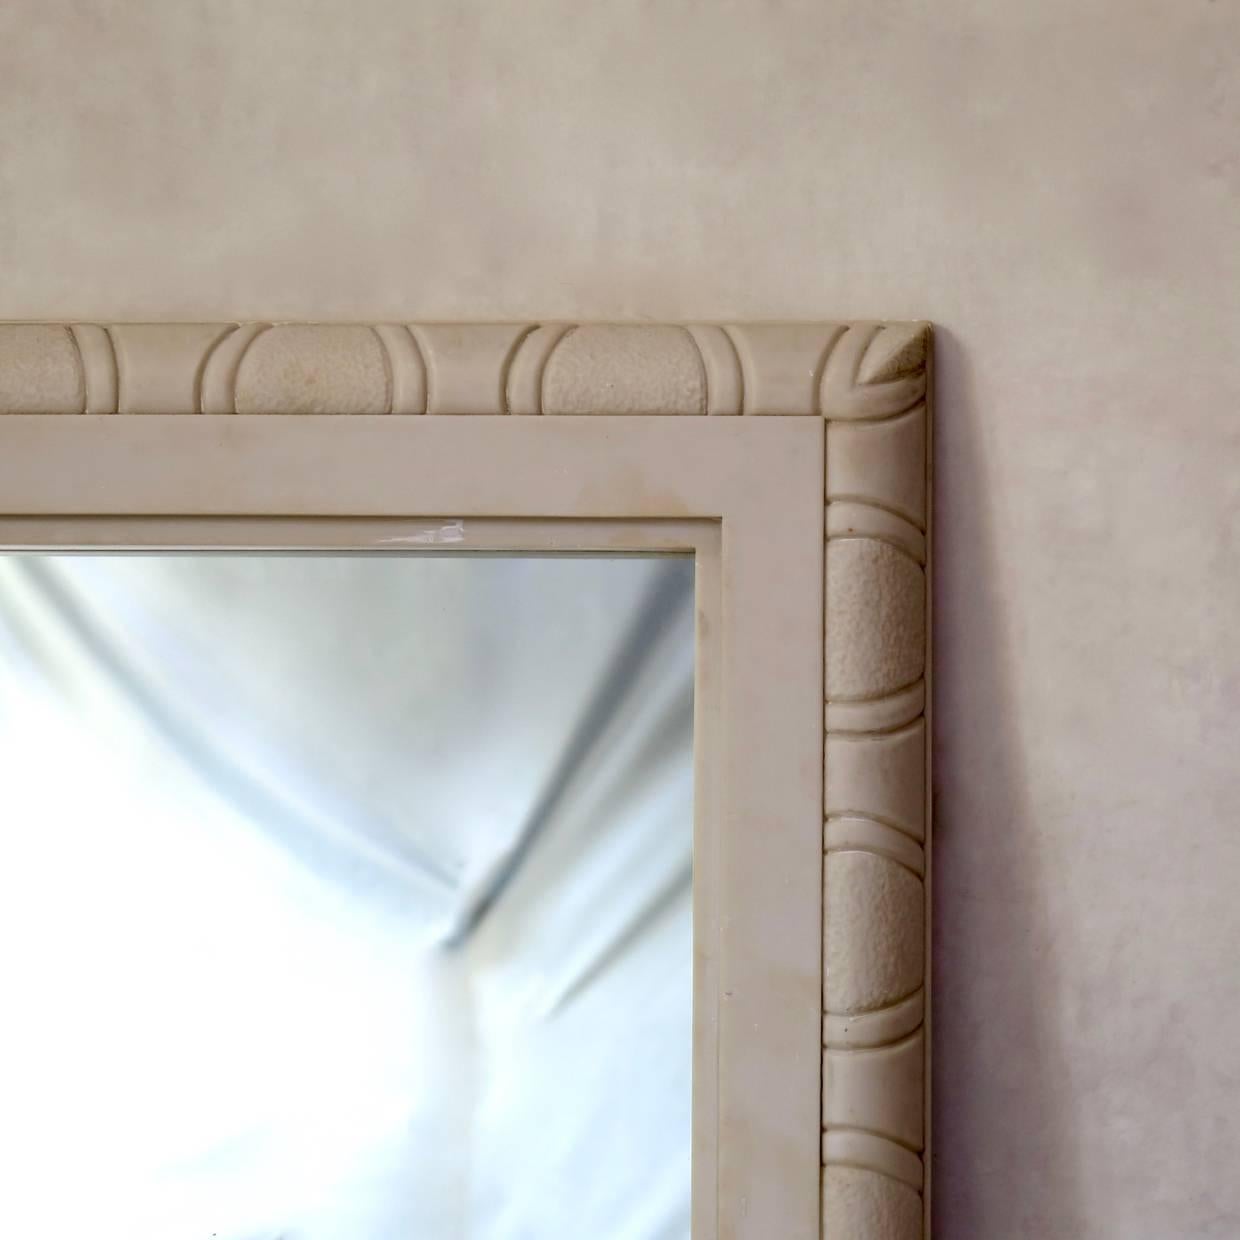 Elegant pair of Art Deco mirrors with white marble frames. One rectangular and one square.

Dimensions provided below are for the rectangular mirror. The square one measures (in centimeters): 90 x 90.

     